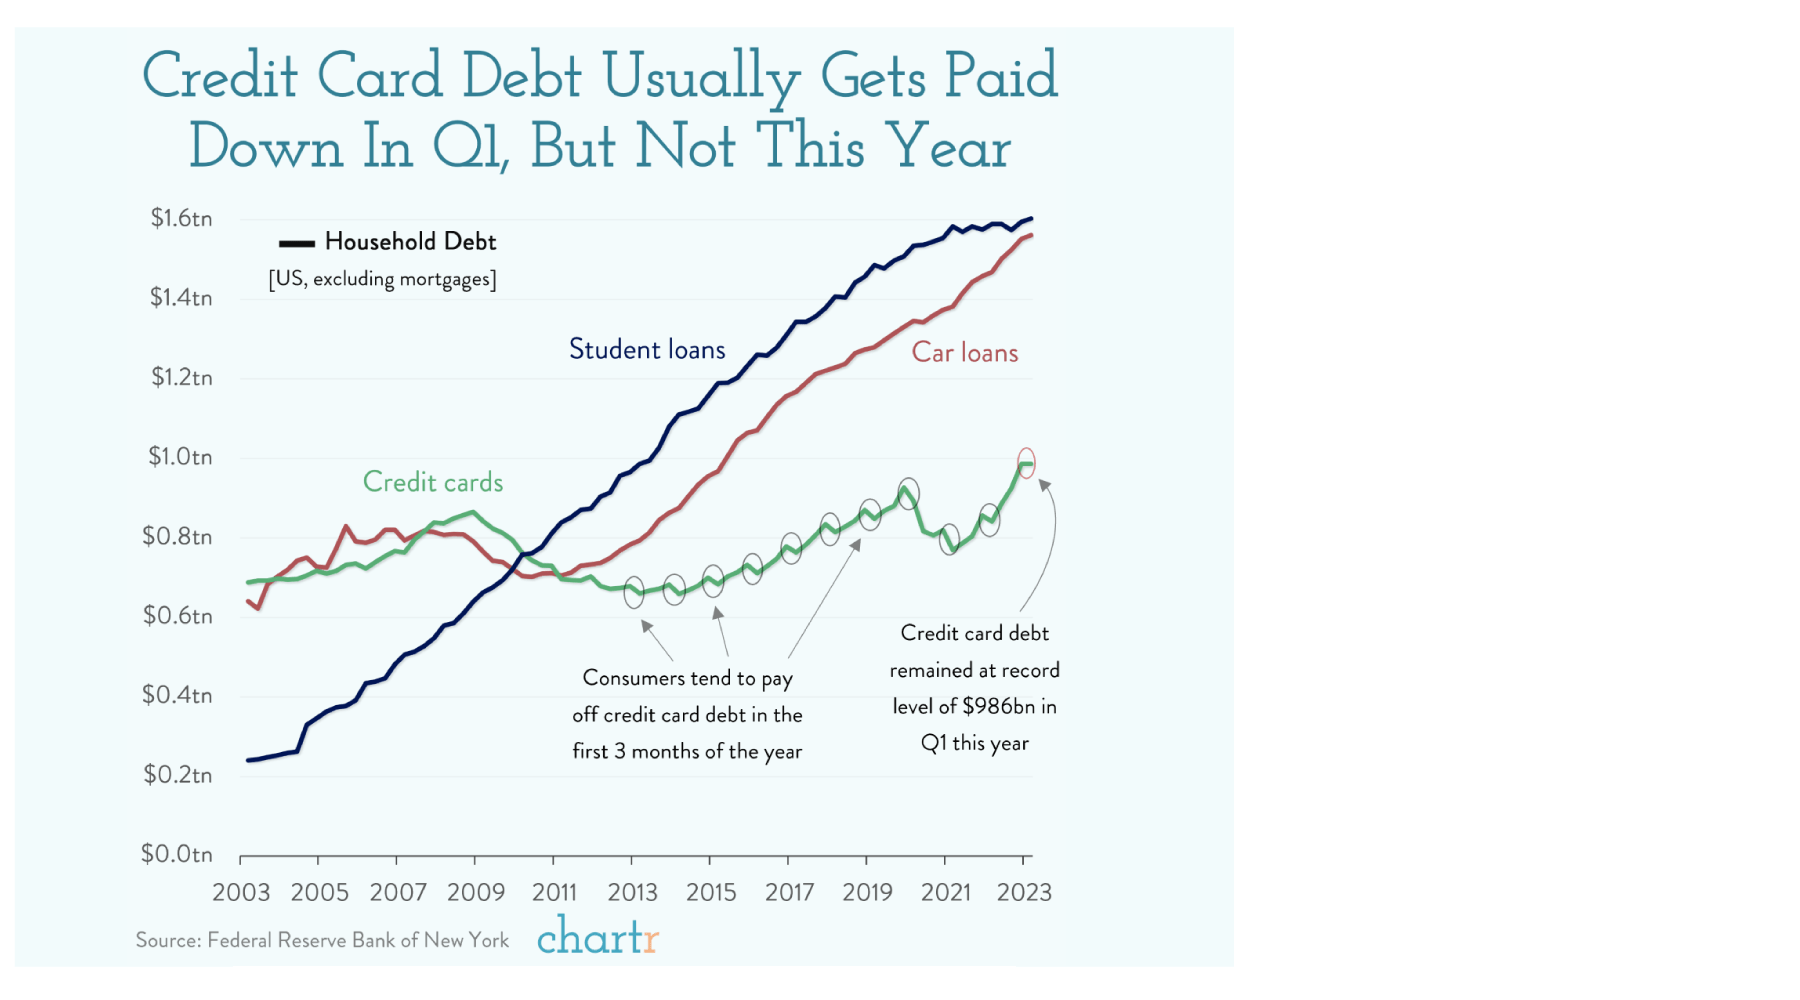 A graph shows that credit card debt usually gets paid down in 2 but not this year